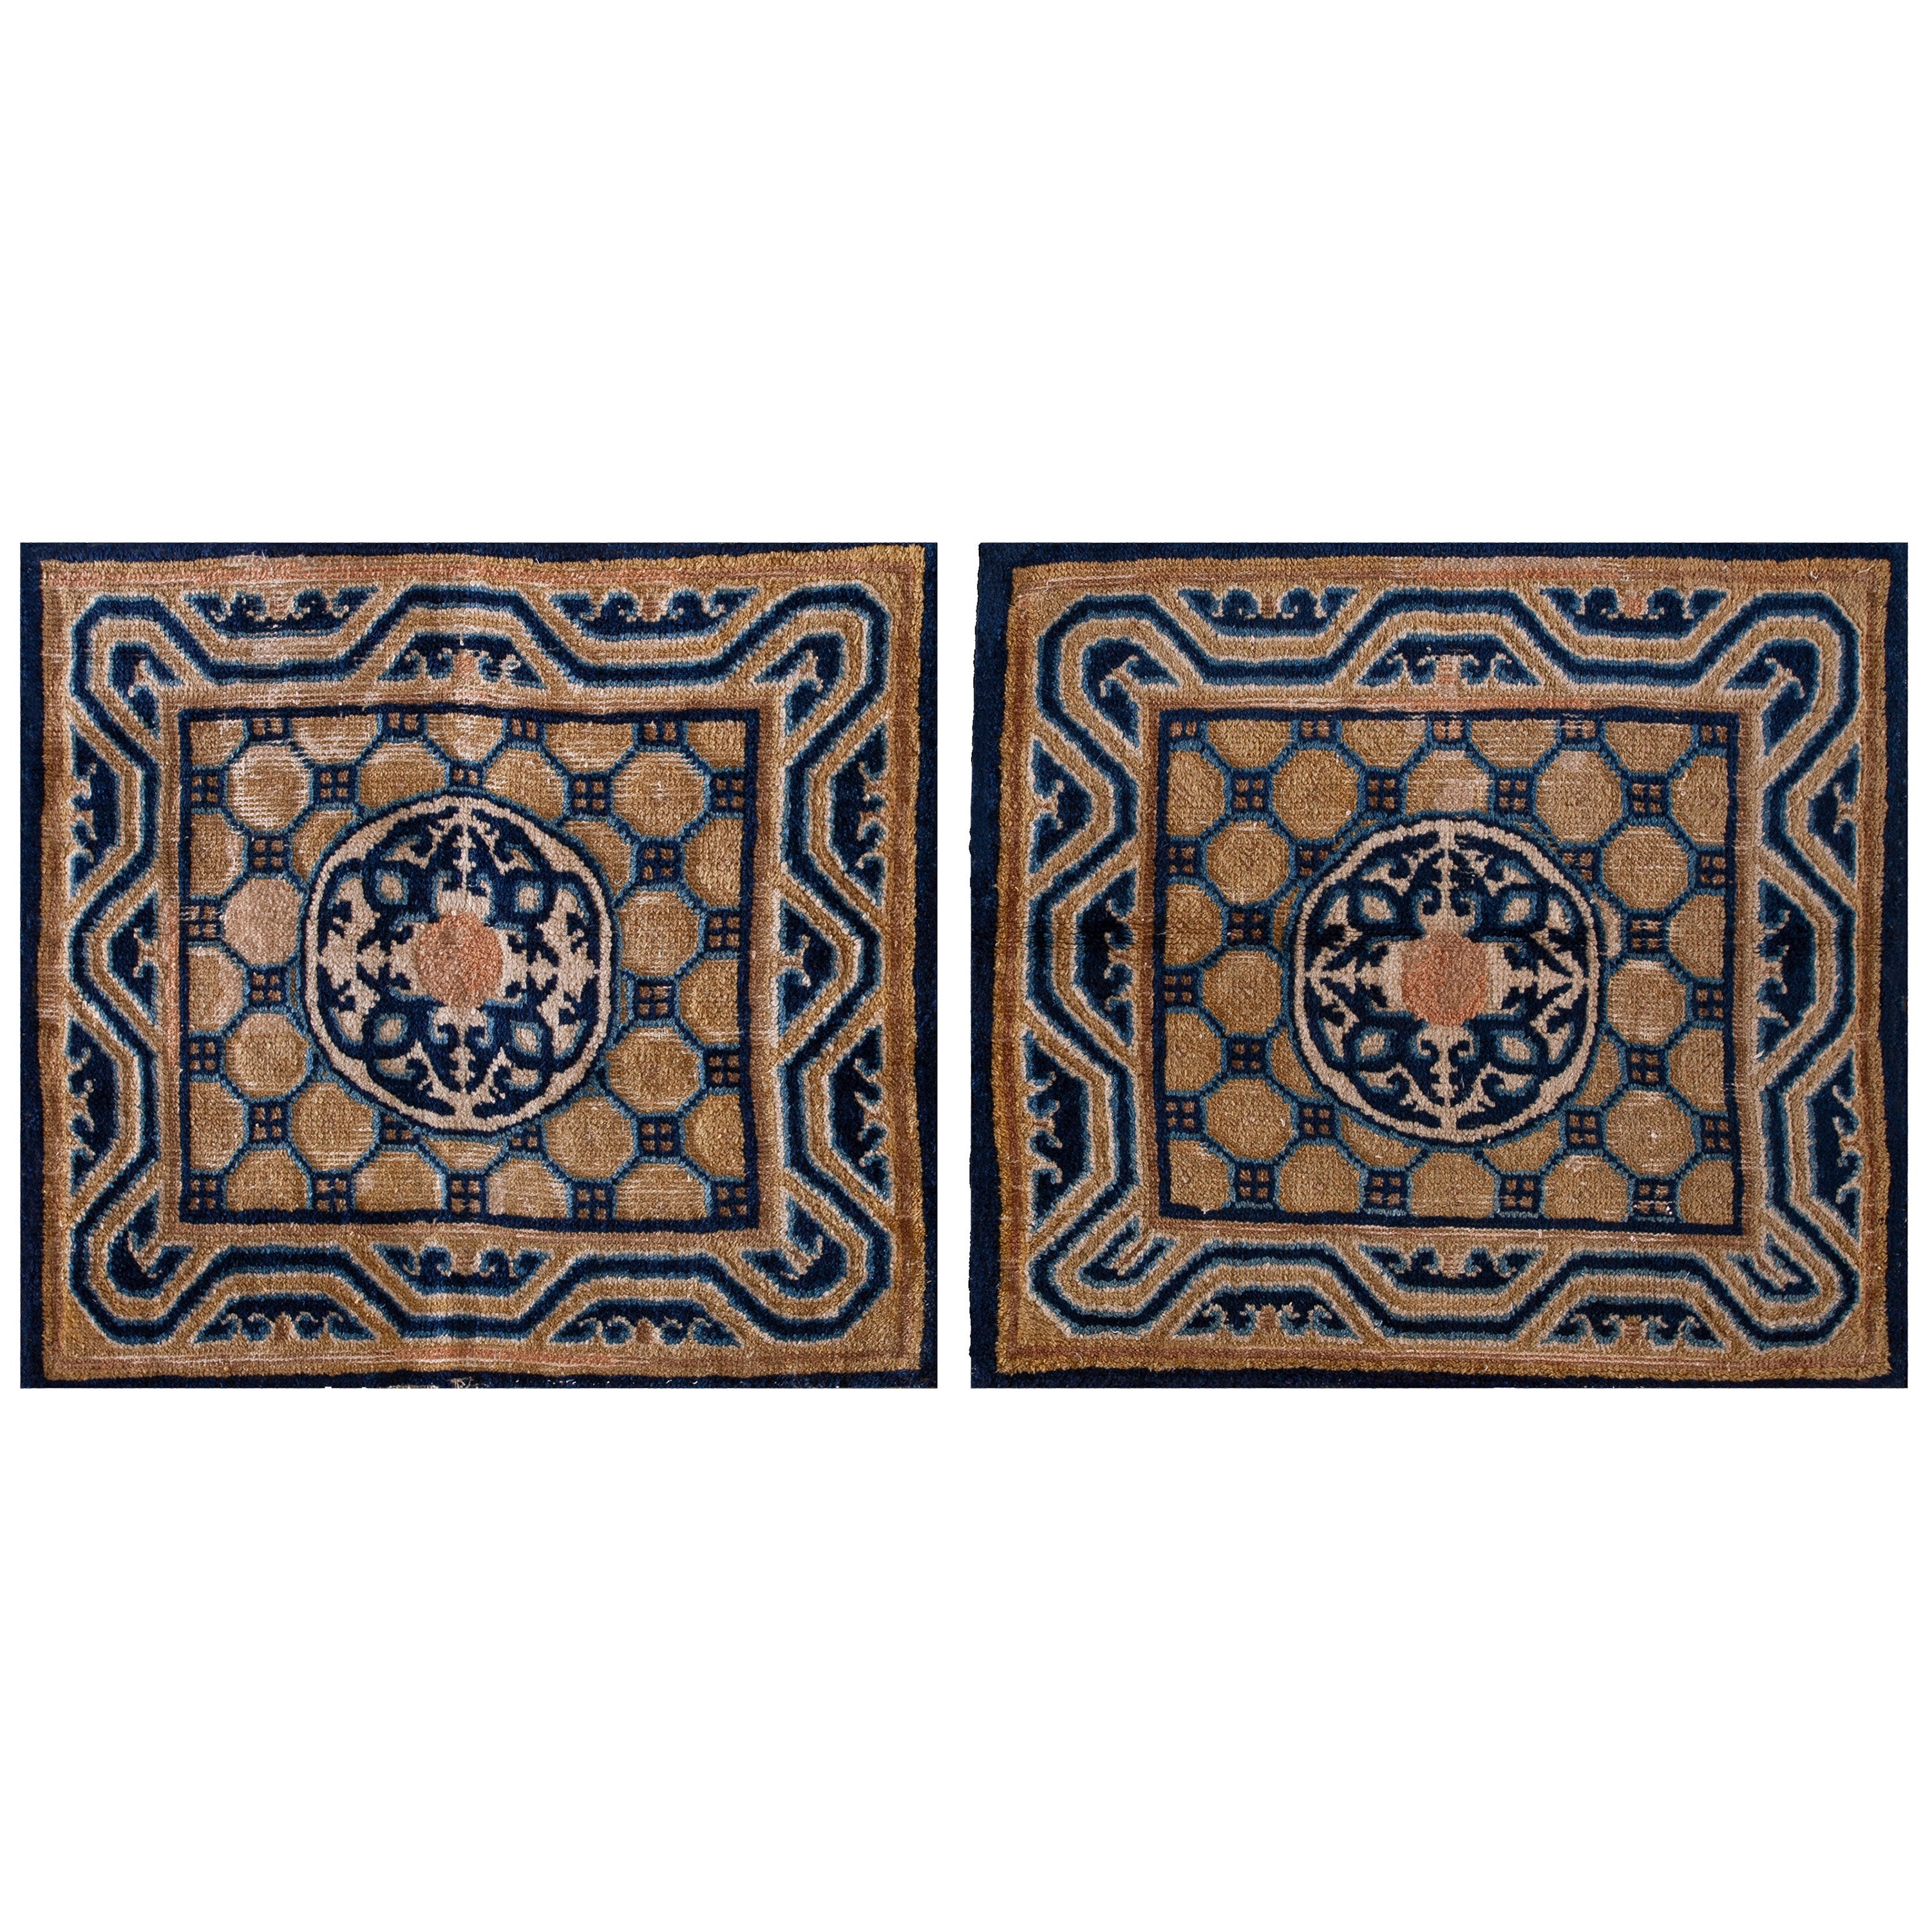 Pair of Antique Chinese Ningxia Pair Rug For Sale